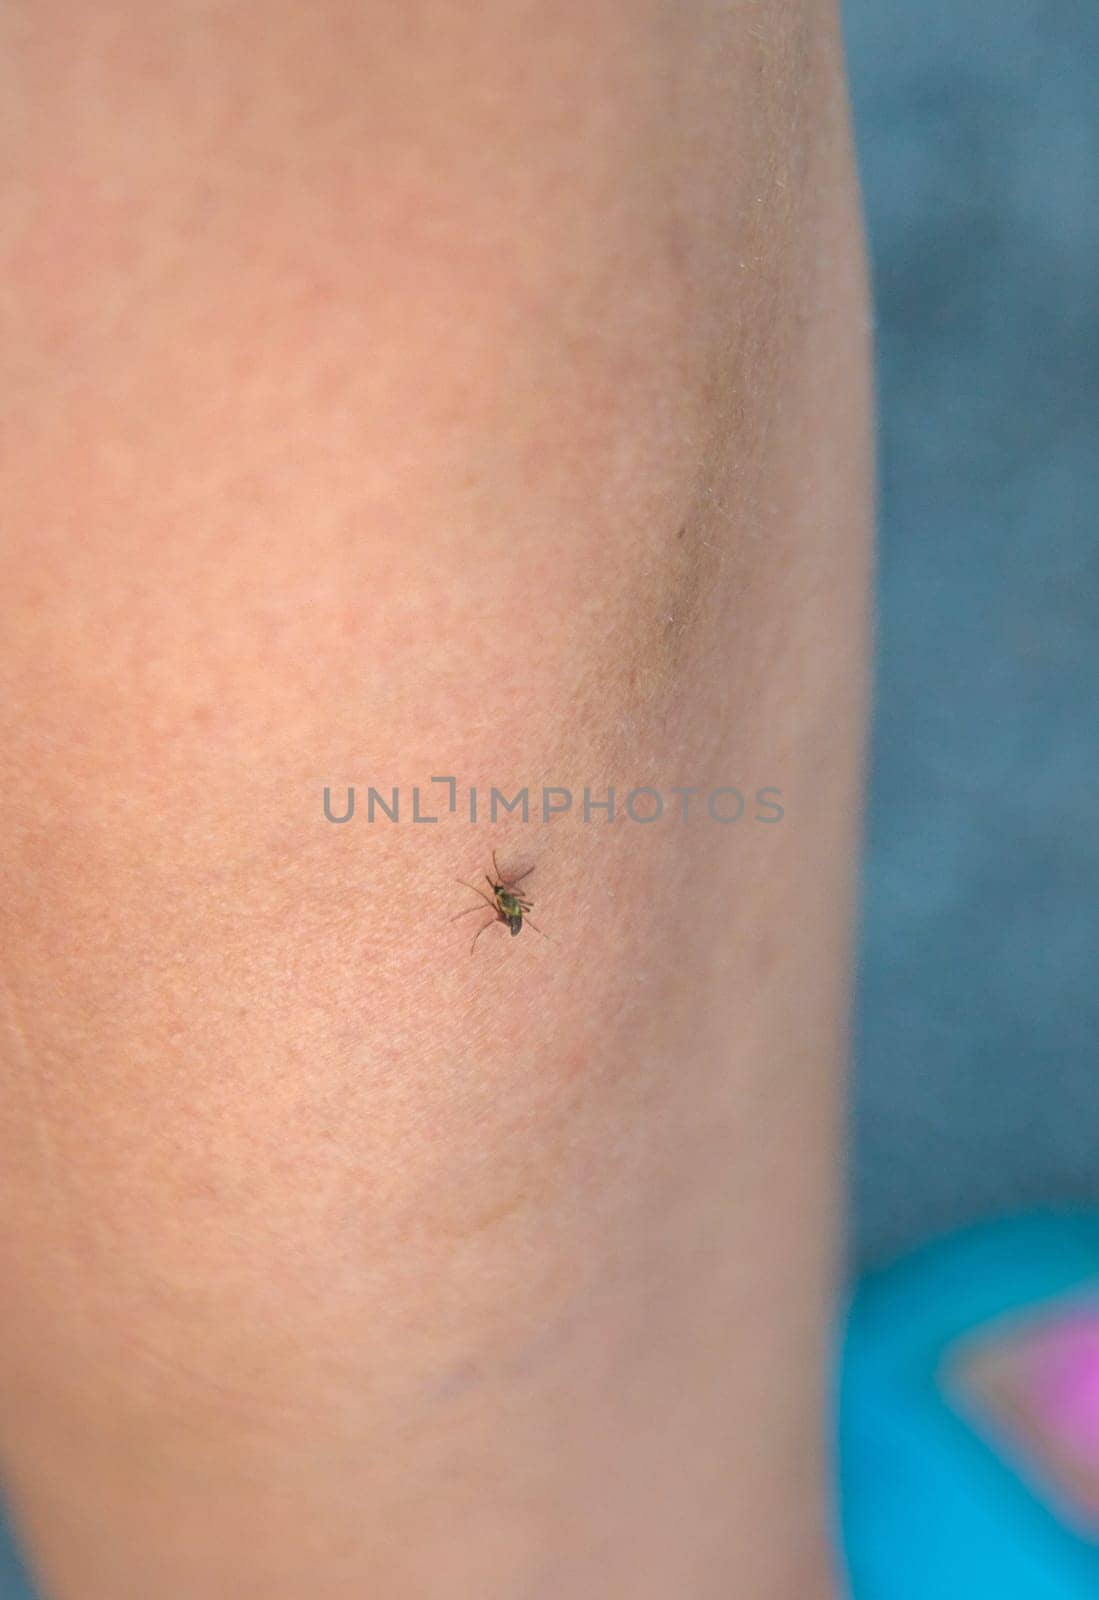 A mosquito bites a person close-up. Selective focus. by yanadjana